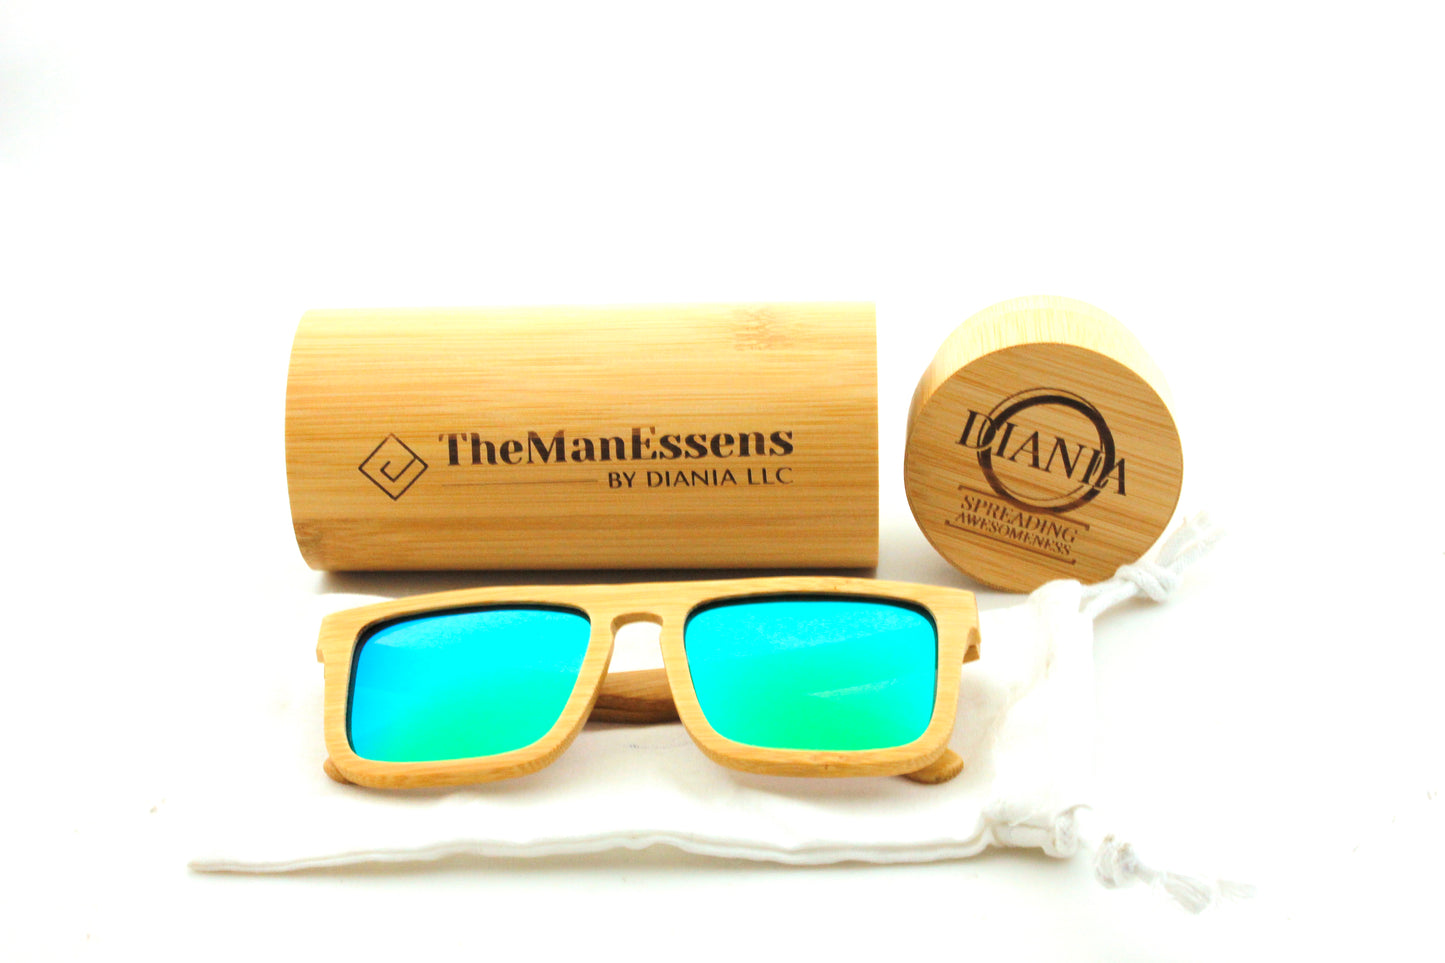 Teixereta bamboo wood sunglasses on cotton bag in front of bamboo tube case